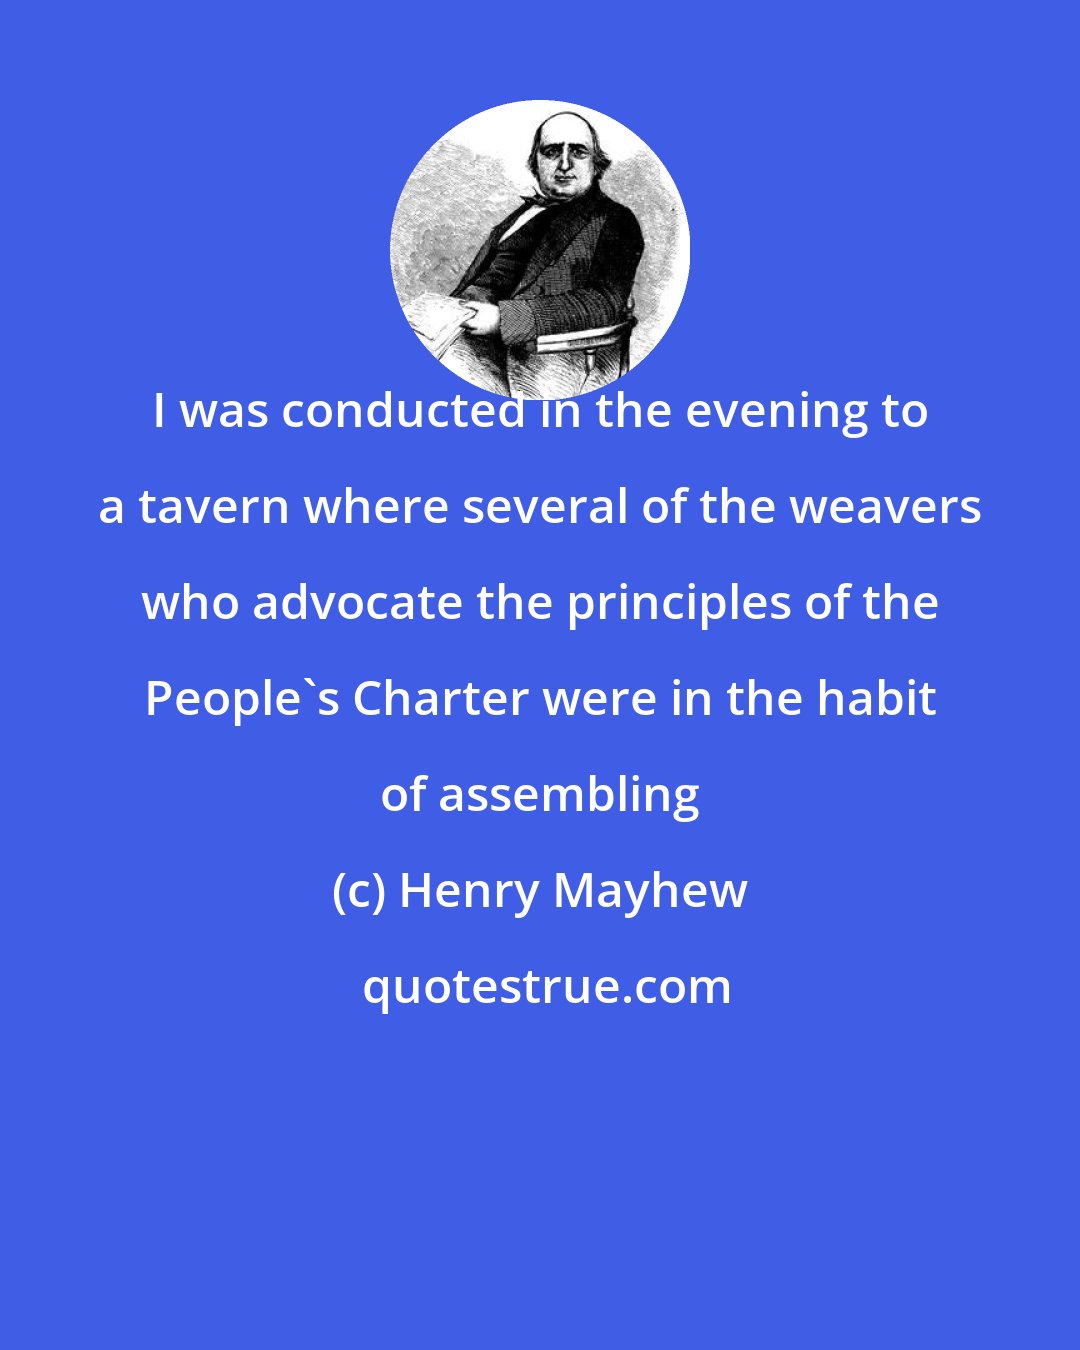 Henry Mayhew: I was conducted in the evening to a tavern where several of the weavers who advocate the principles of the People's Charter were in the habit of assembling